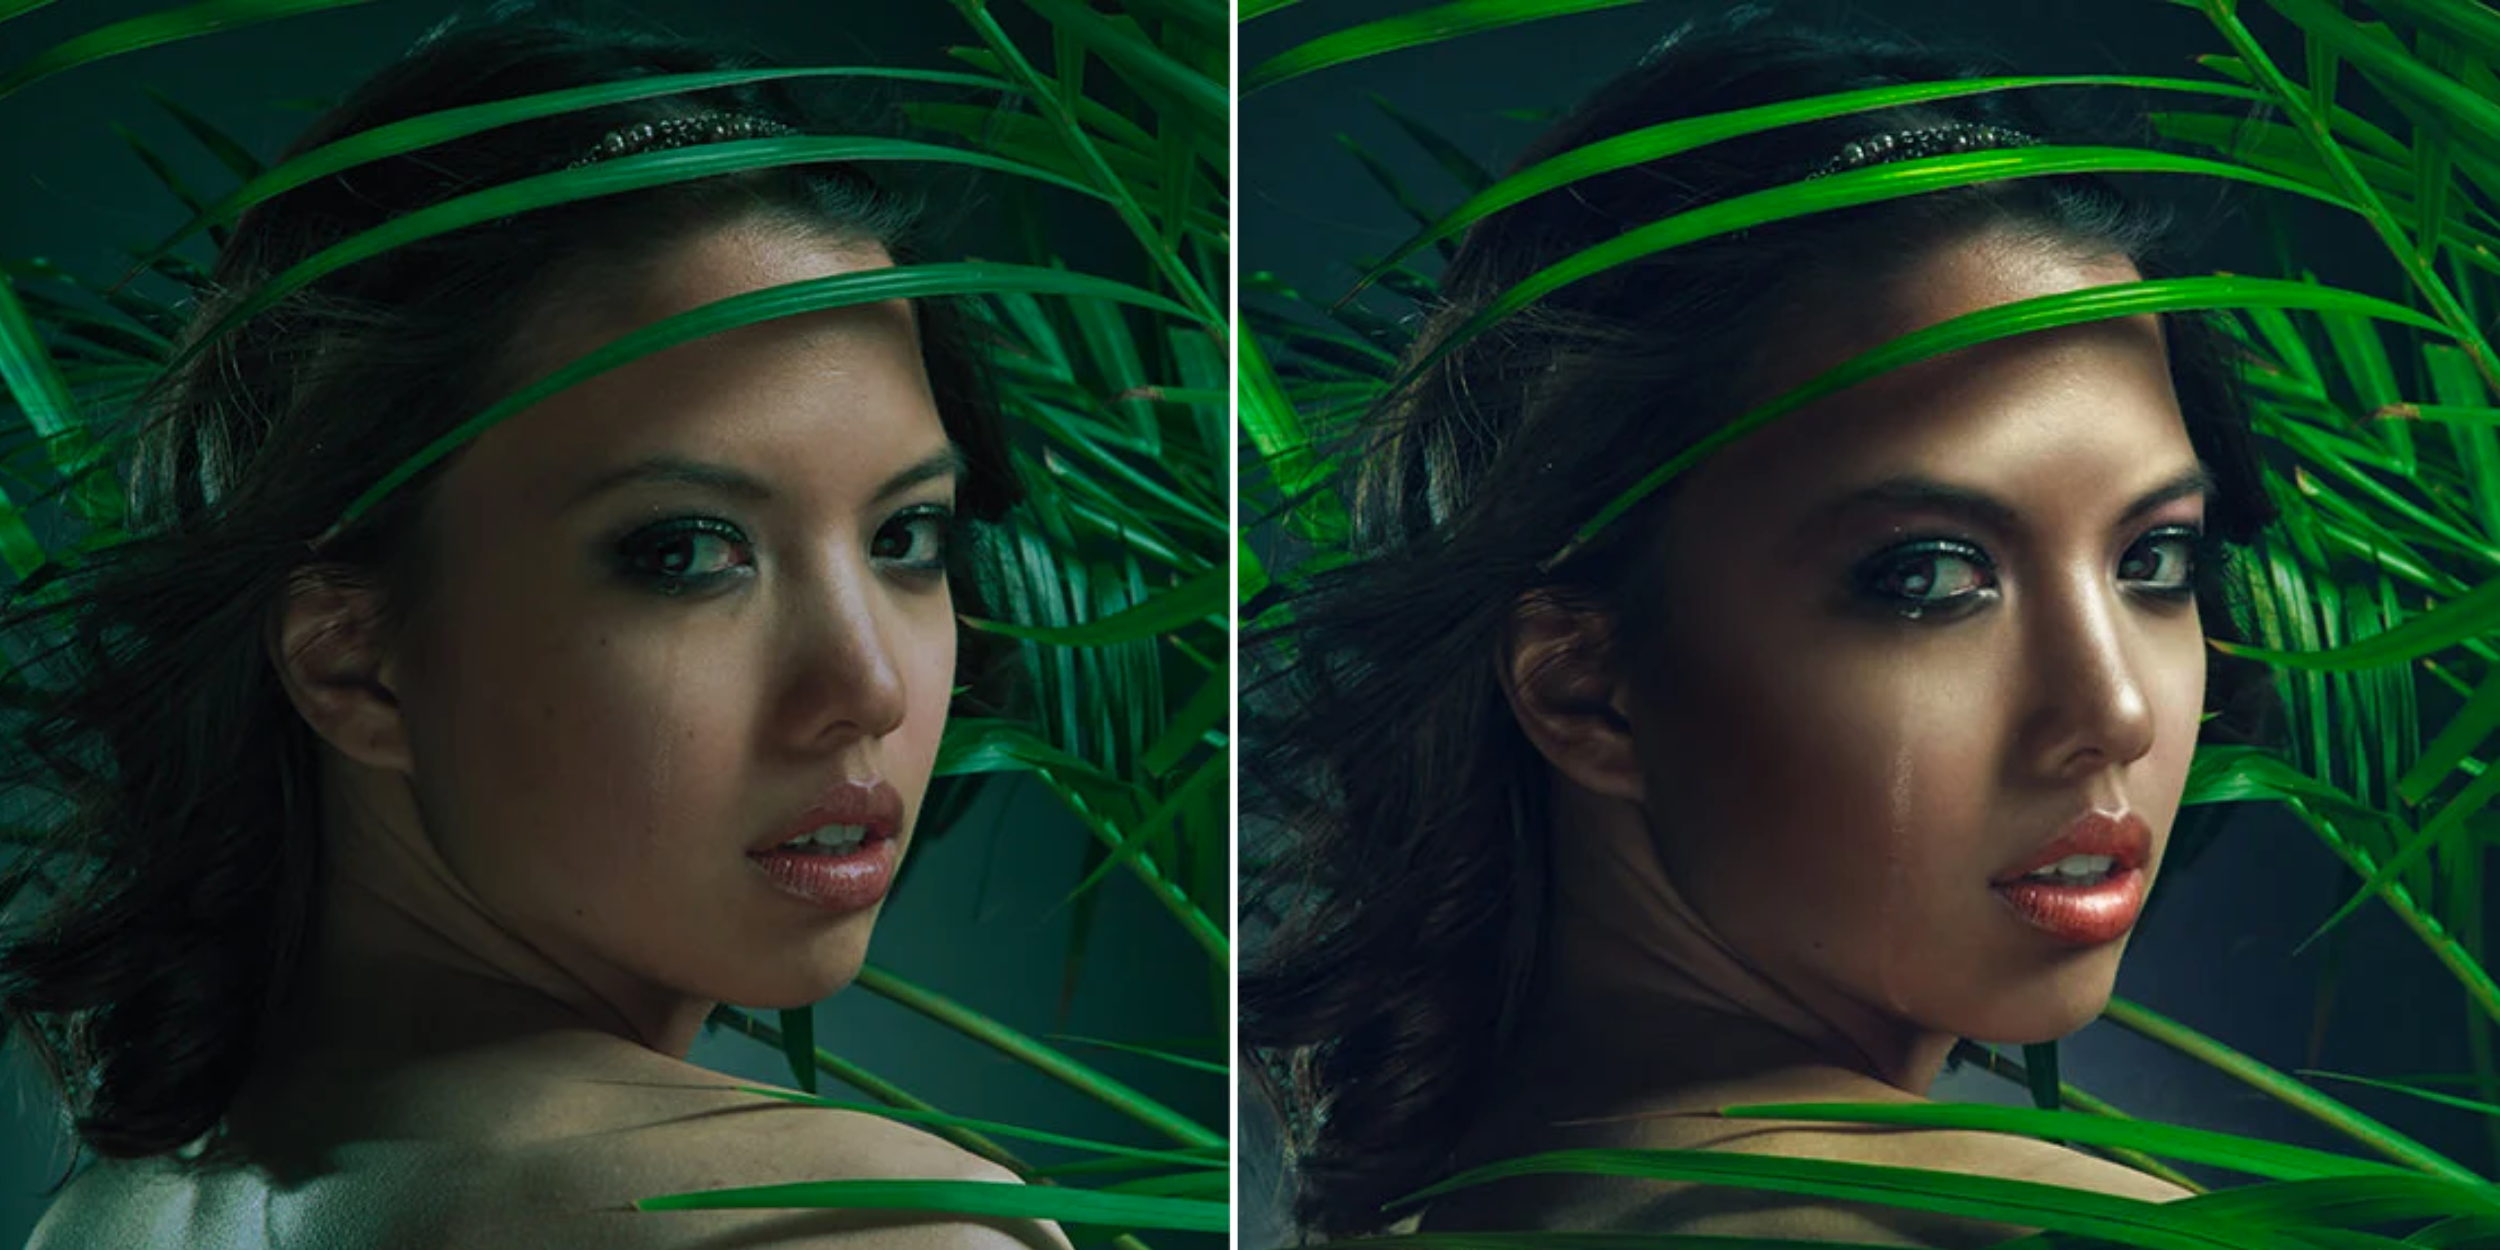 How Photo Editing Services Can Improve Your Images